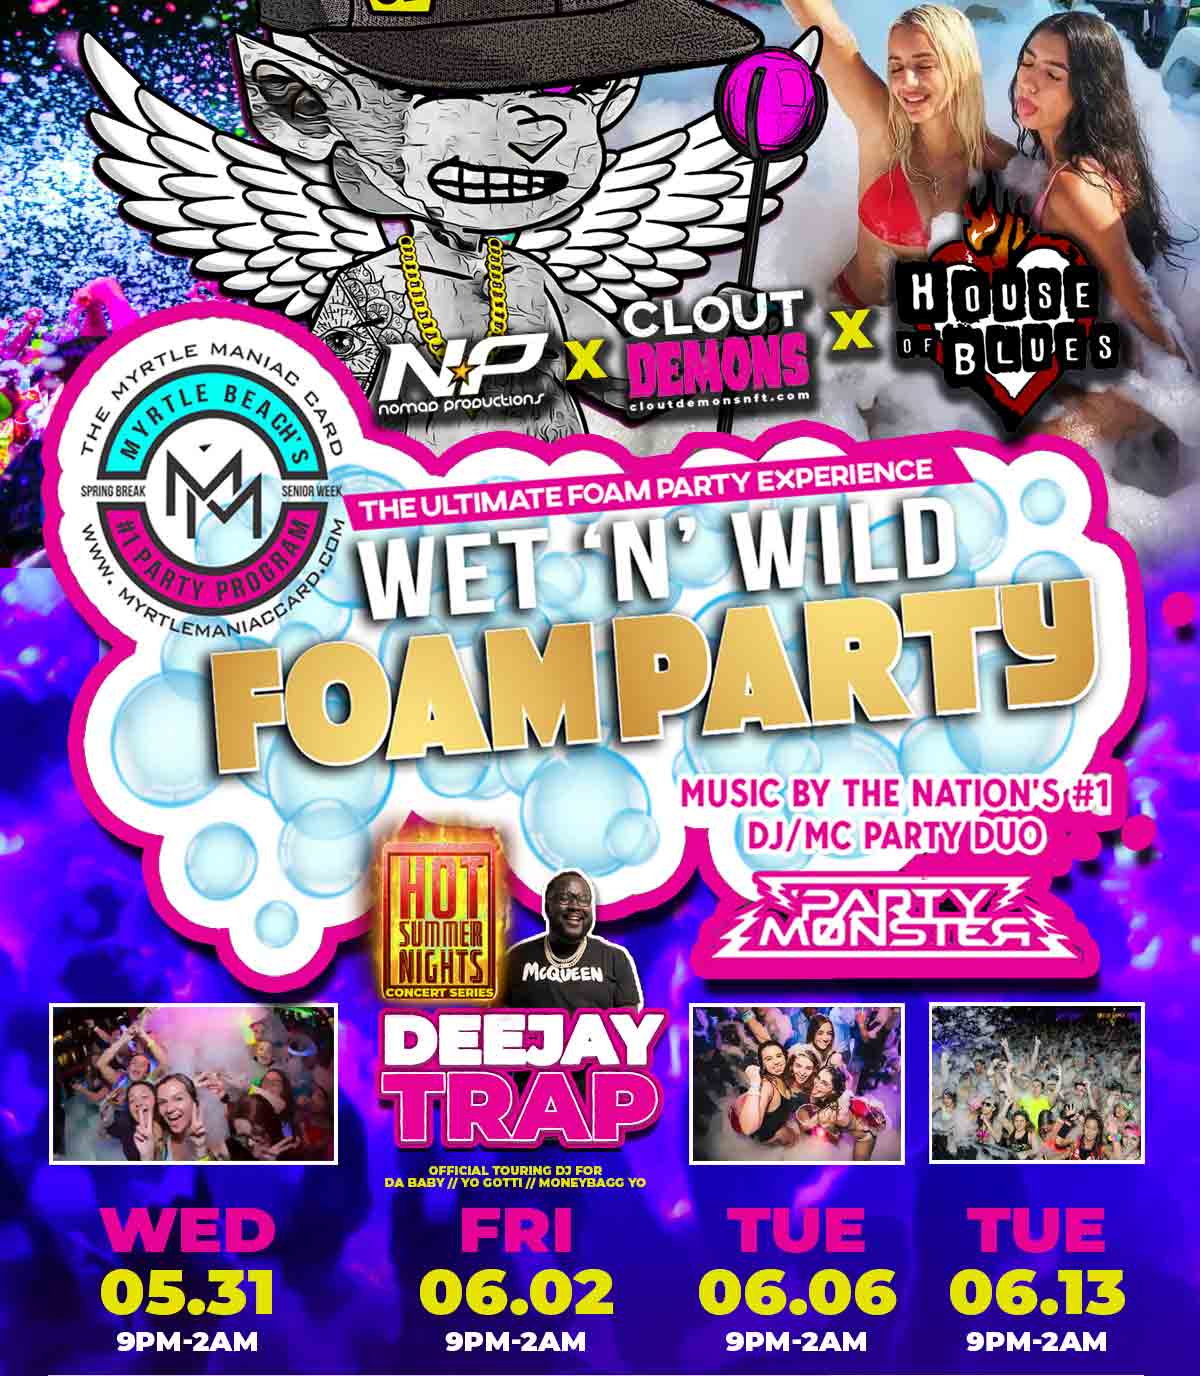 Clout Demons Clothing and Myrtle Maniac have teamed up with the House of Blues for the most epic Wet n' Wild Foam Party in the USA